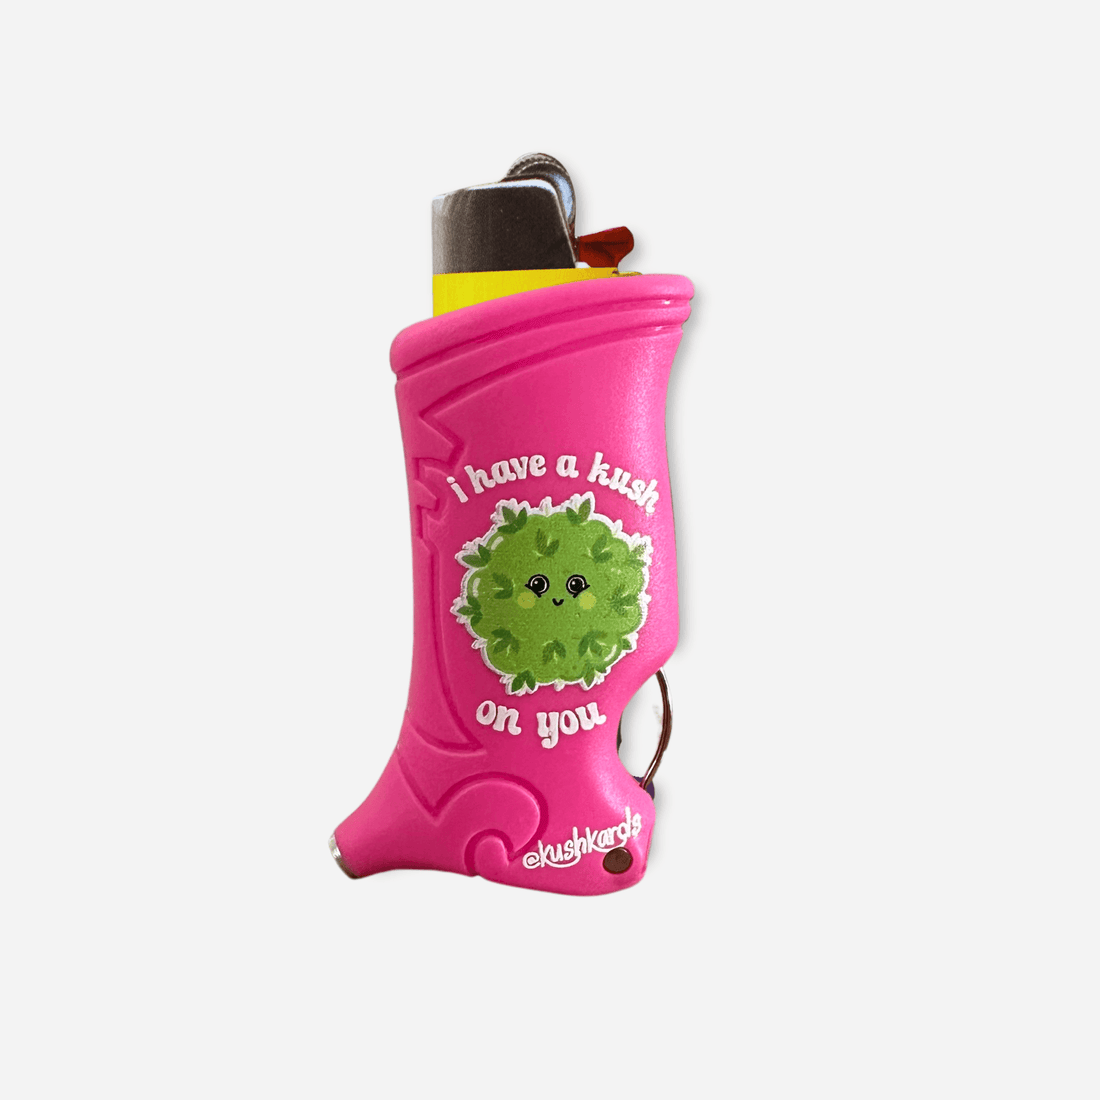 Our Kush On U Toker Poker is a hot pink lighter case with a cute bud on it that says &quot;I have a kush on you&quot;